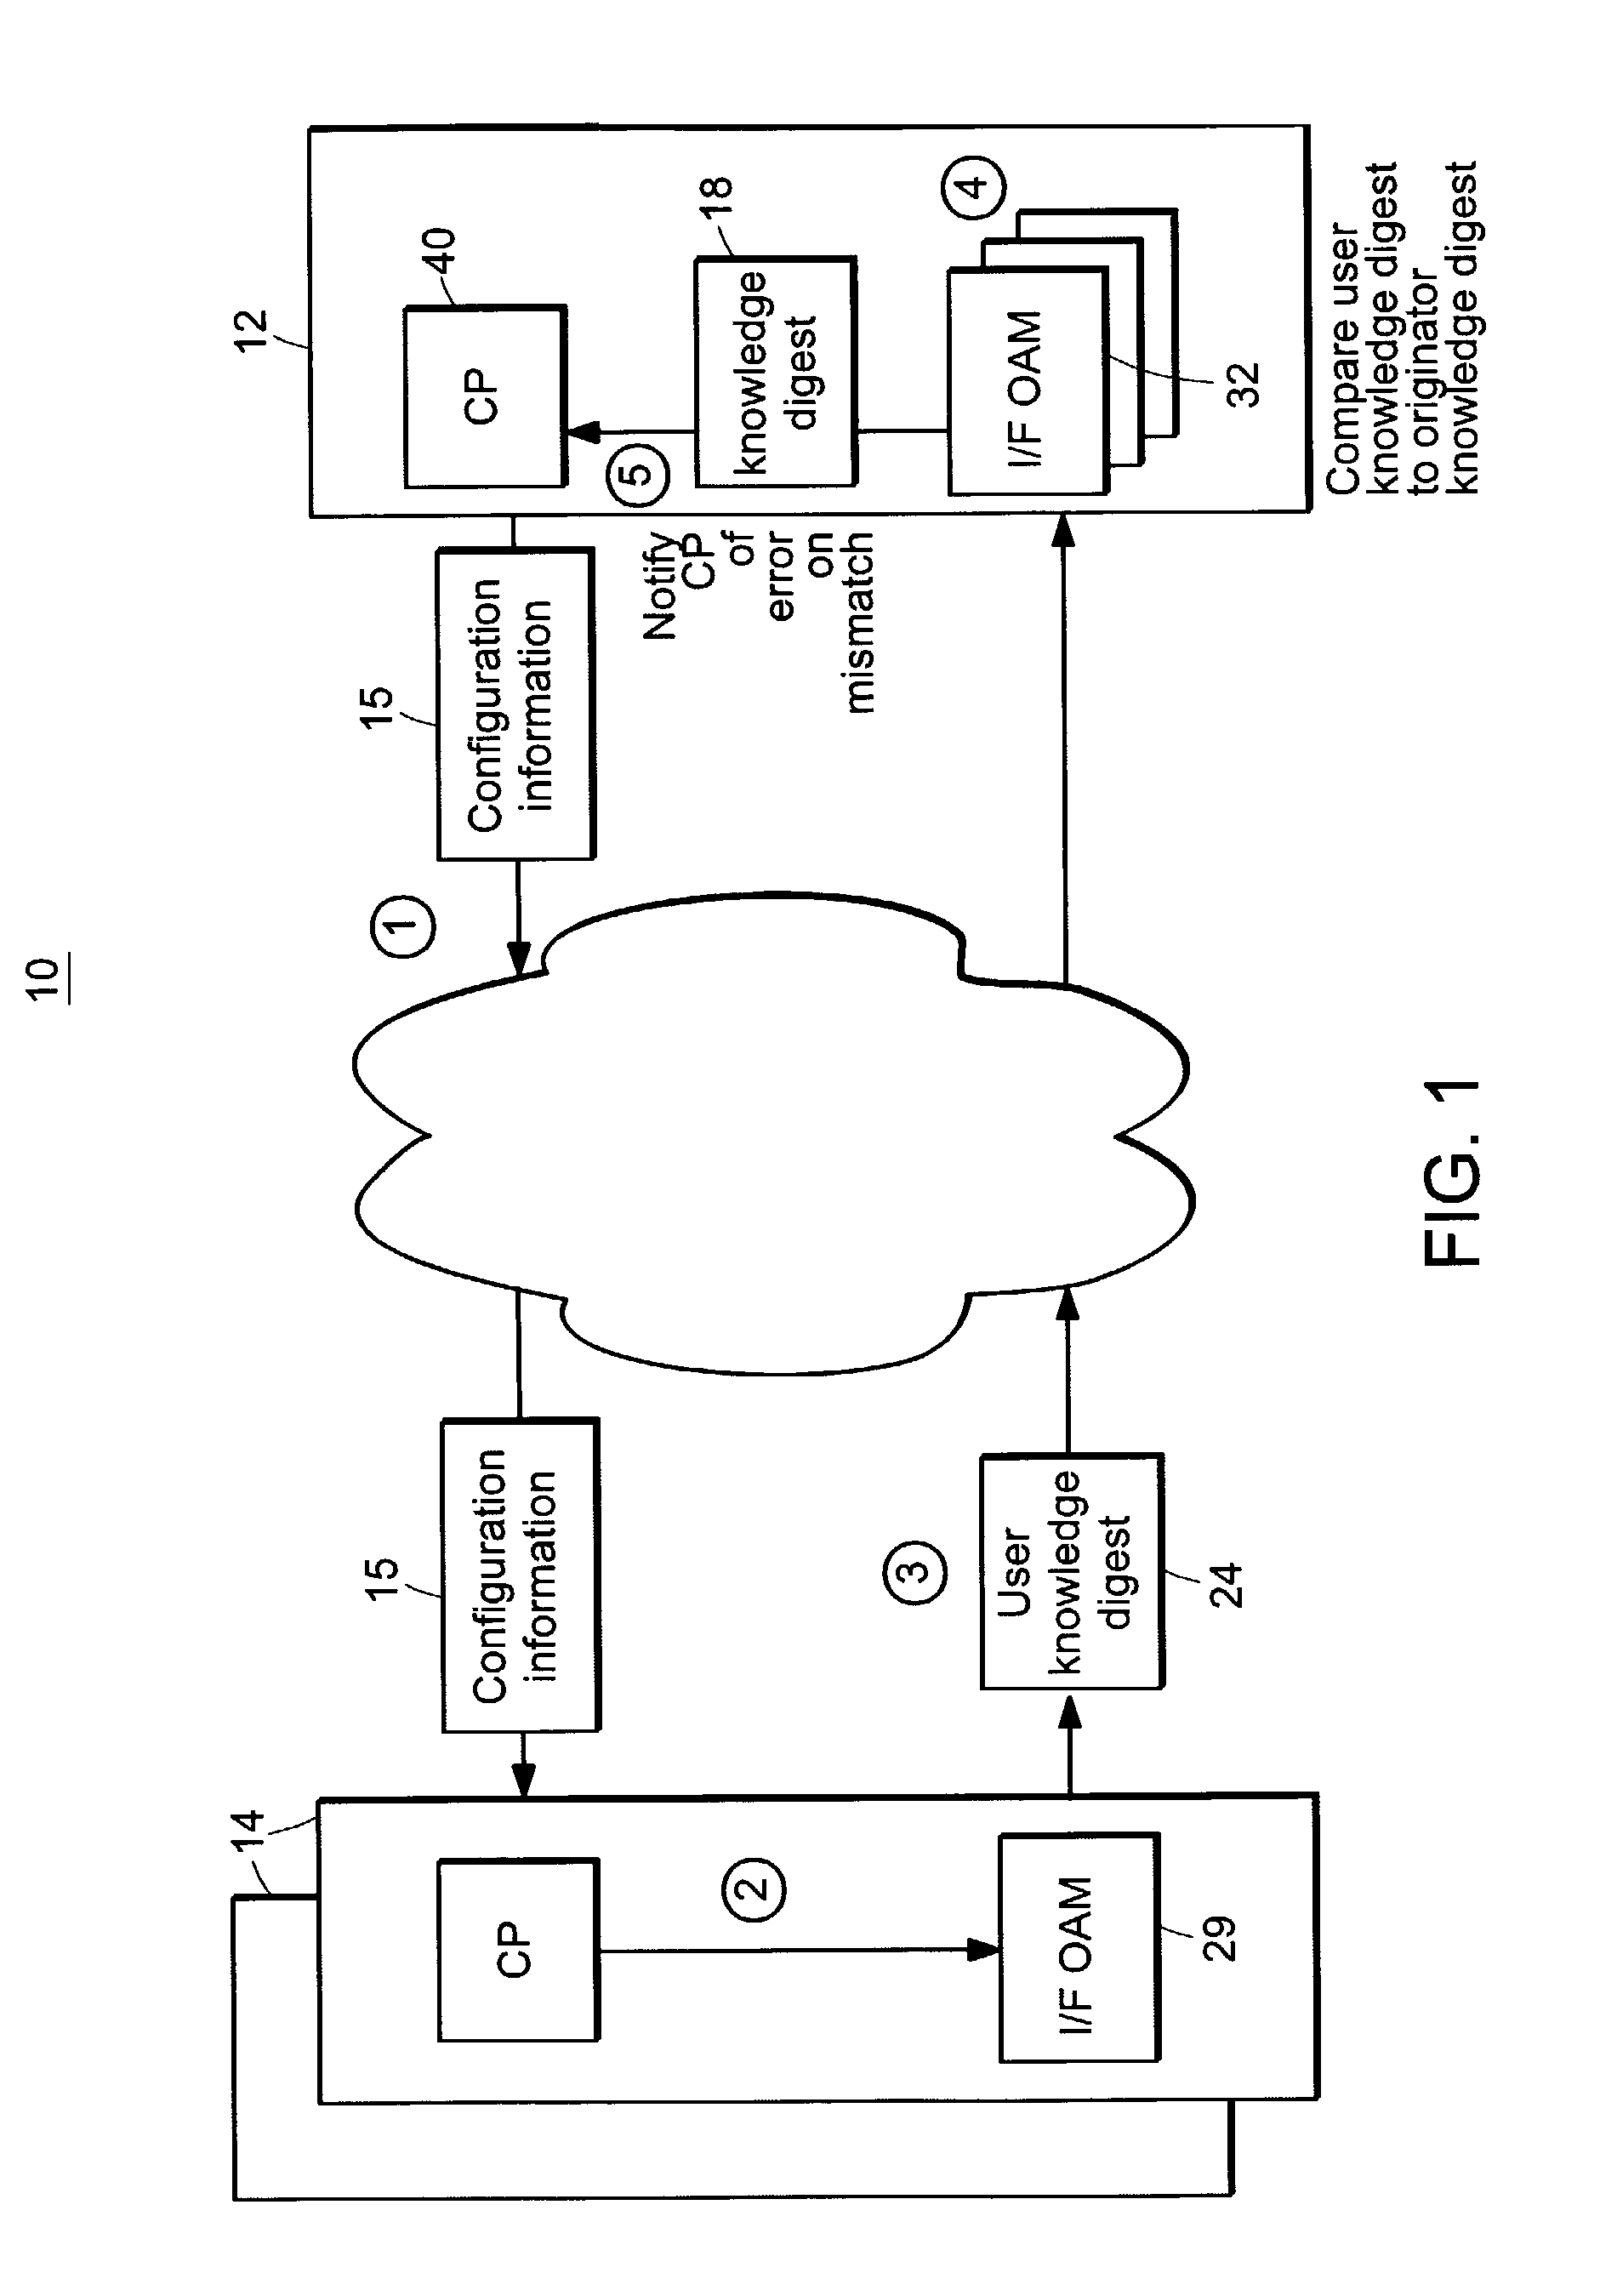 Apparatus for using a verification probe in an LDP MPLS network